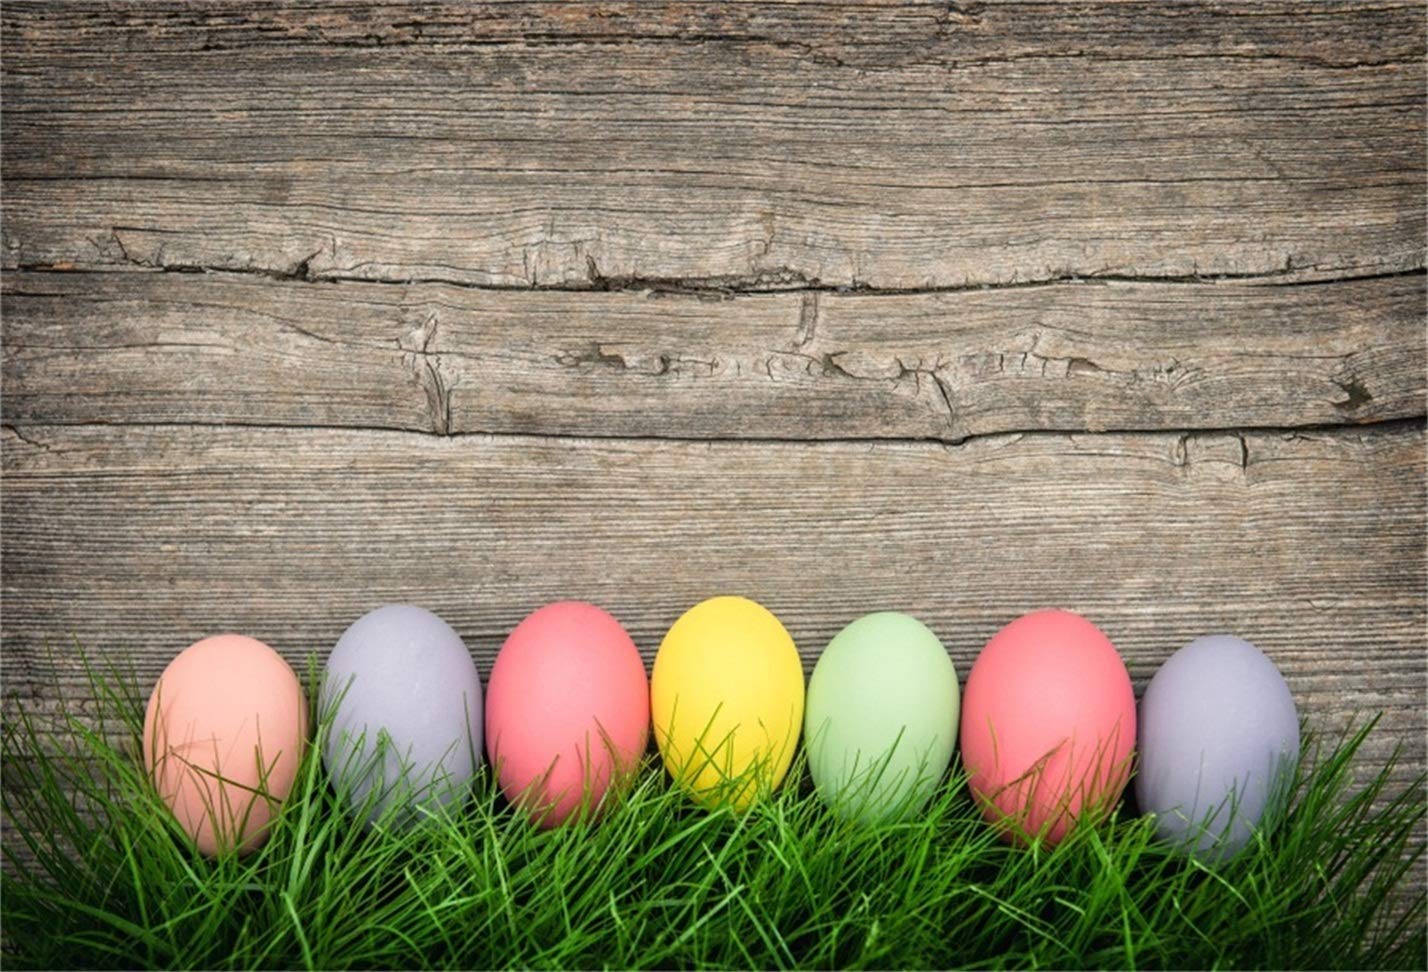 Amazon.com, CSFOTO 7x5ft Background Easter Eggs on Grass Rustic